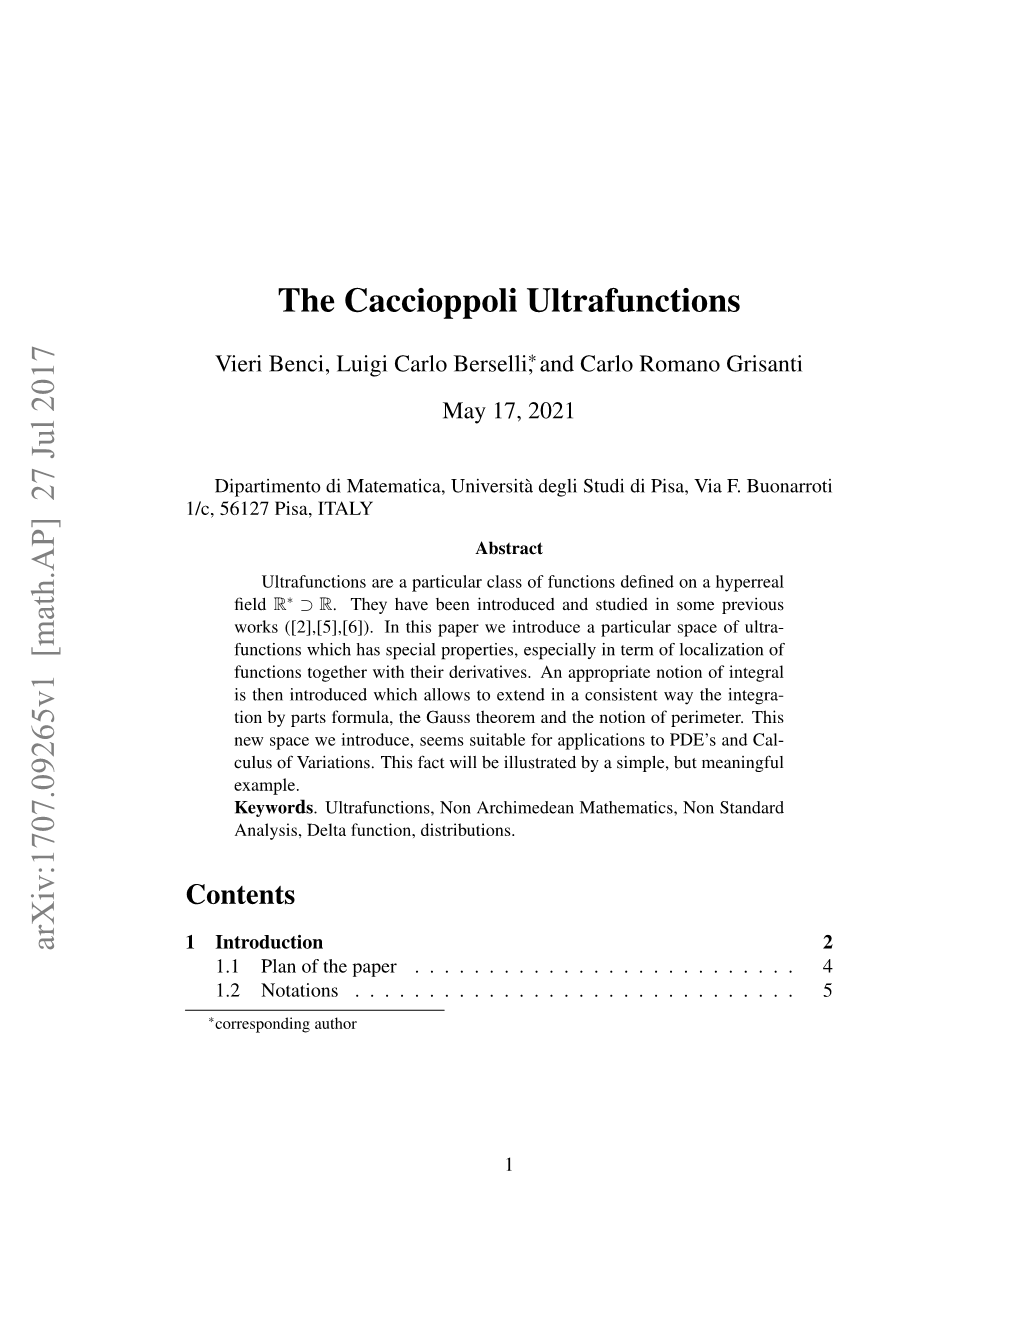 The Caccioppoli Ultrafunctions